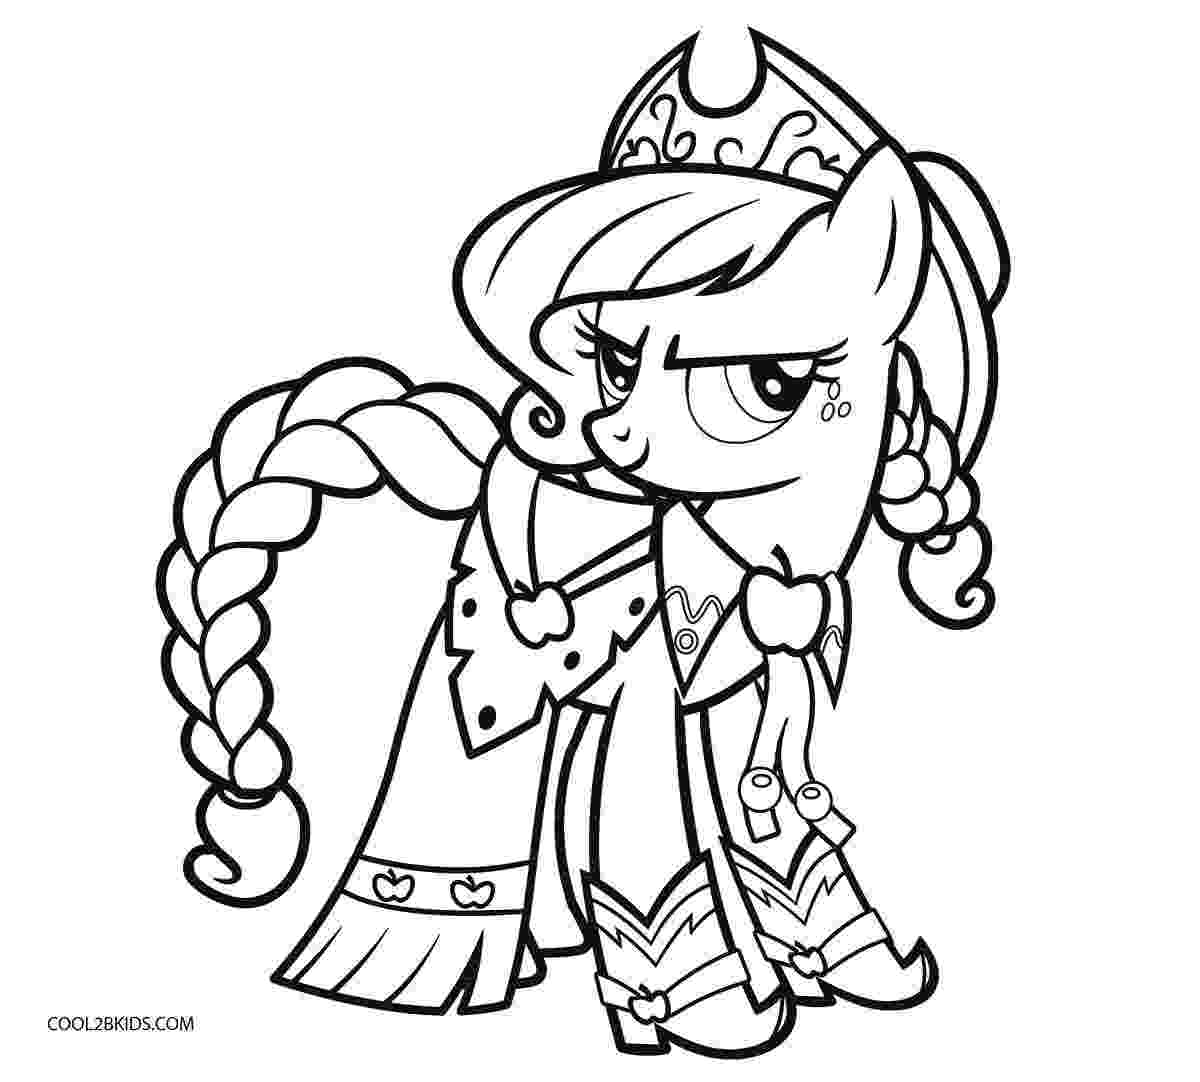 my little pony printables coloring pages free printable my little pony coloring pages for kids coloring little printables pages pony my 